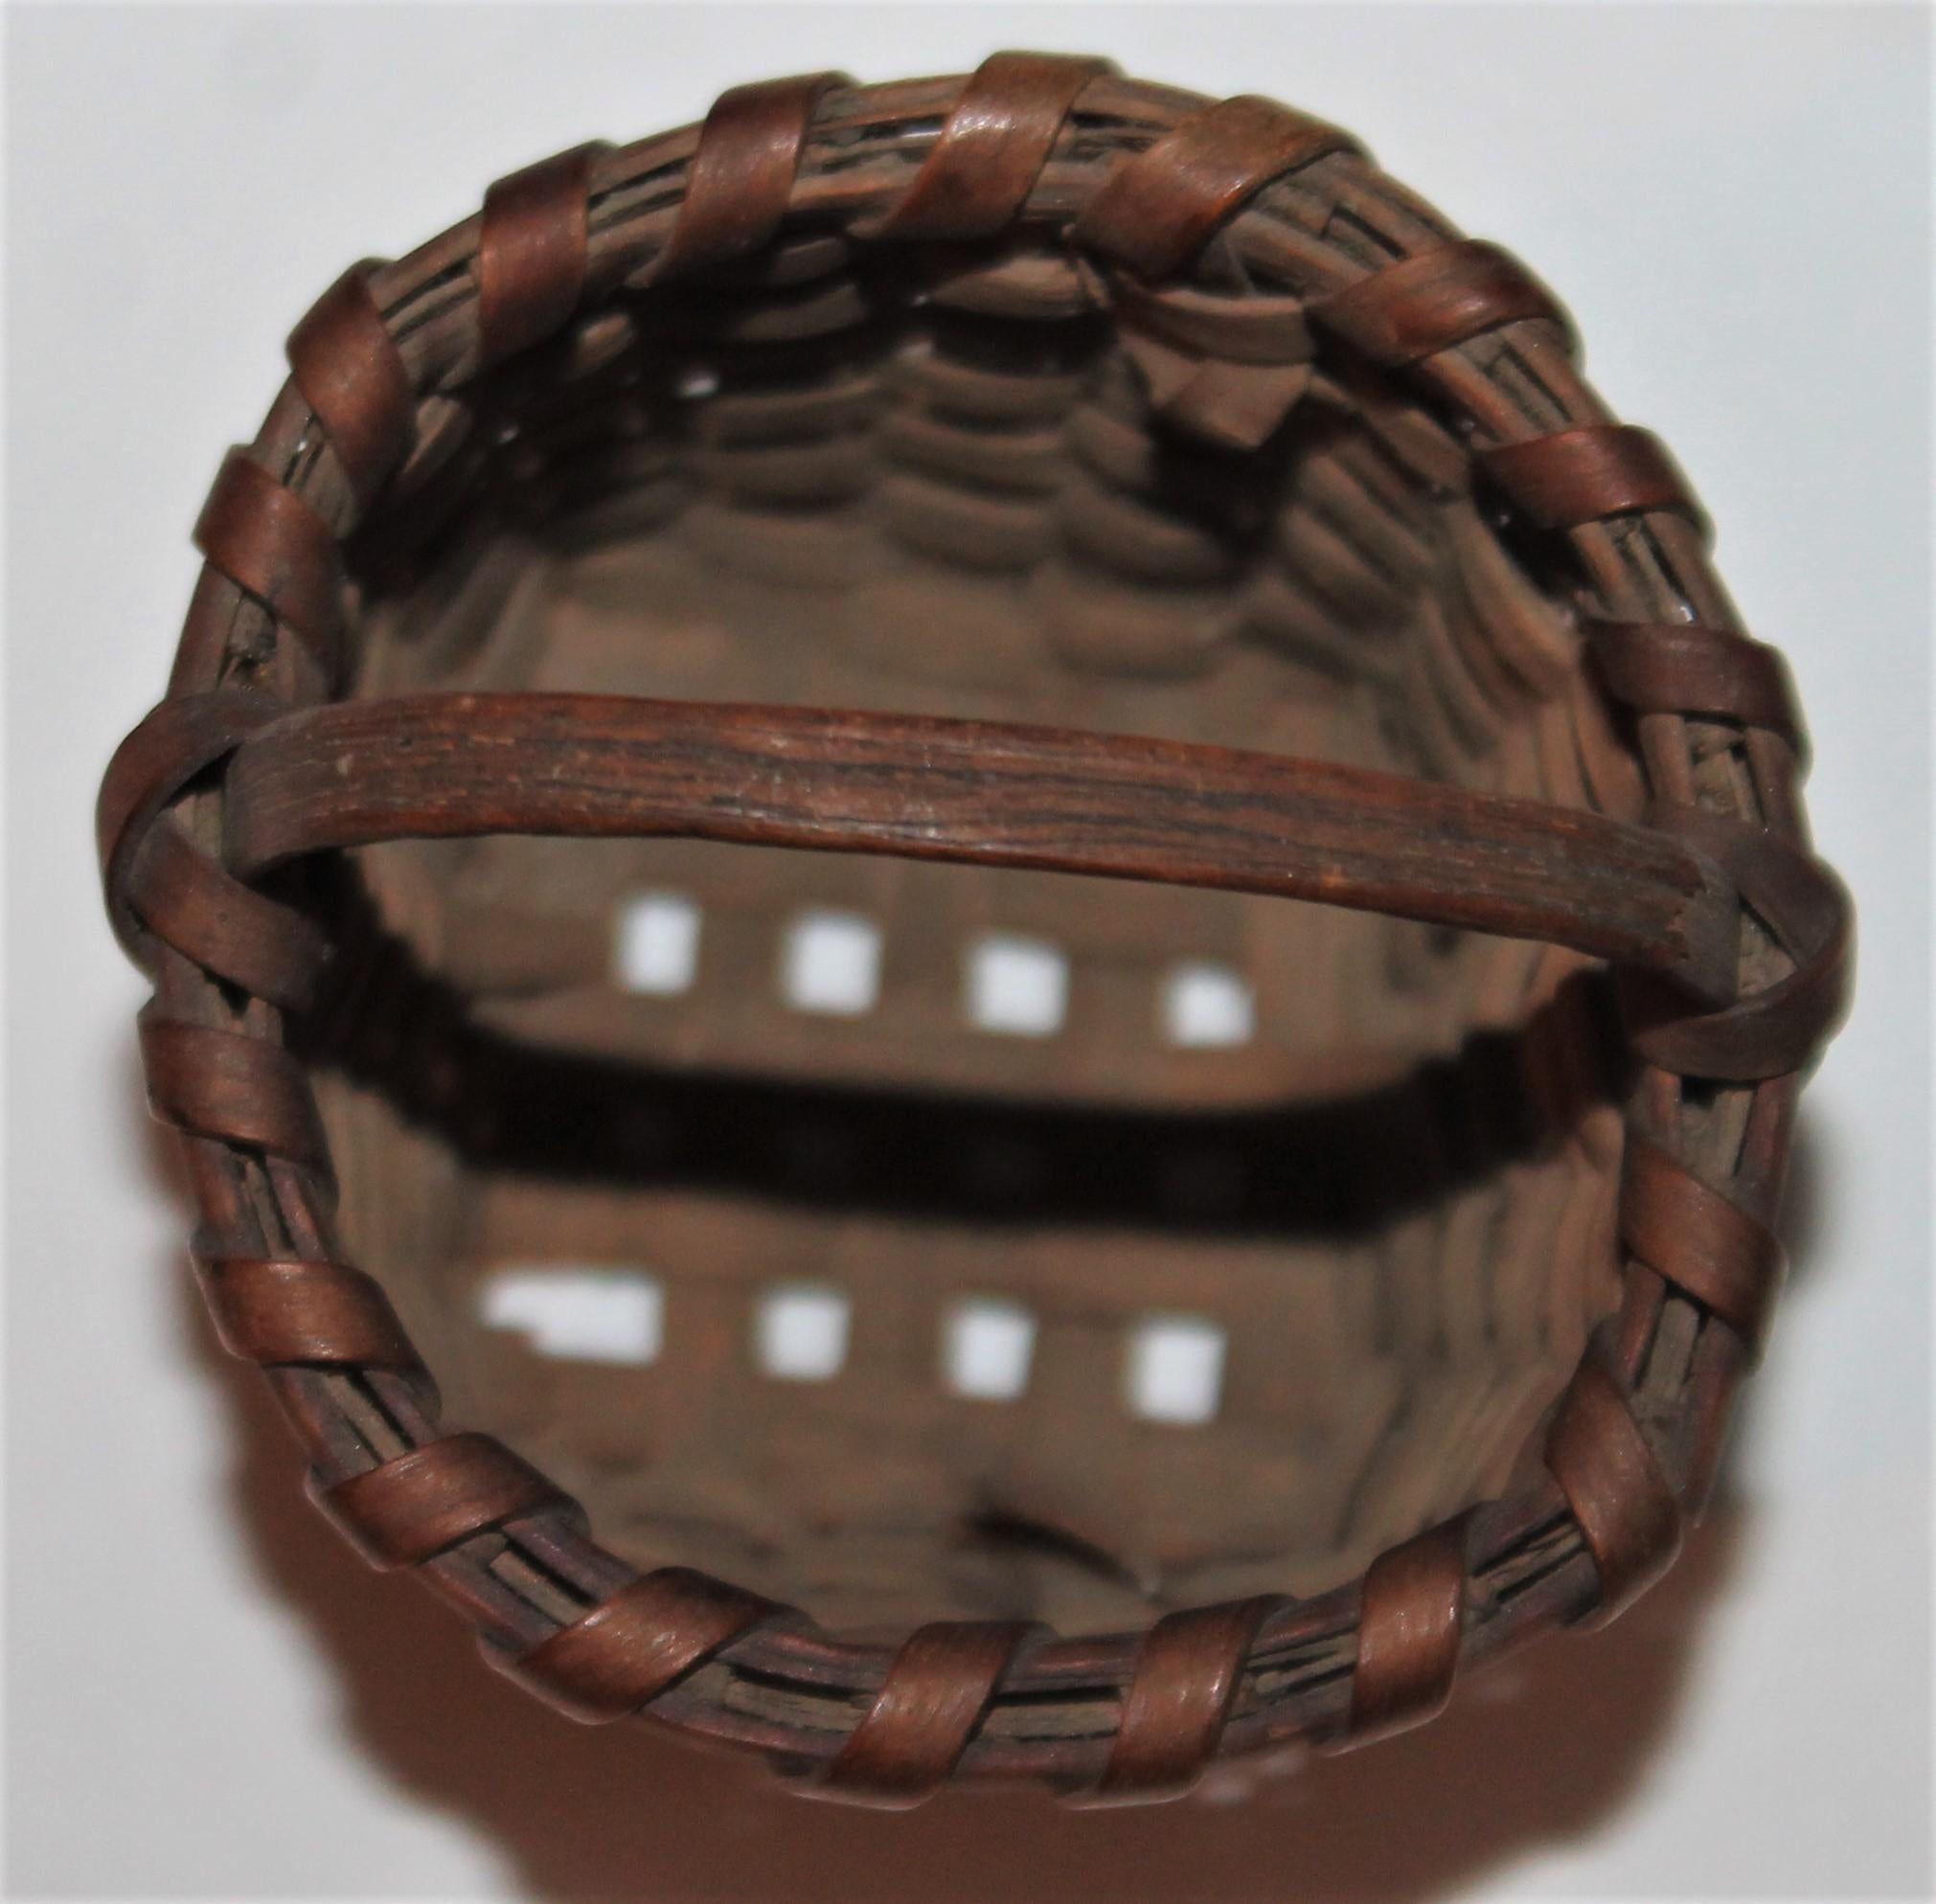 Hand-Crafted 19th Century Miniature Basket with Original Surface